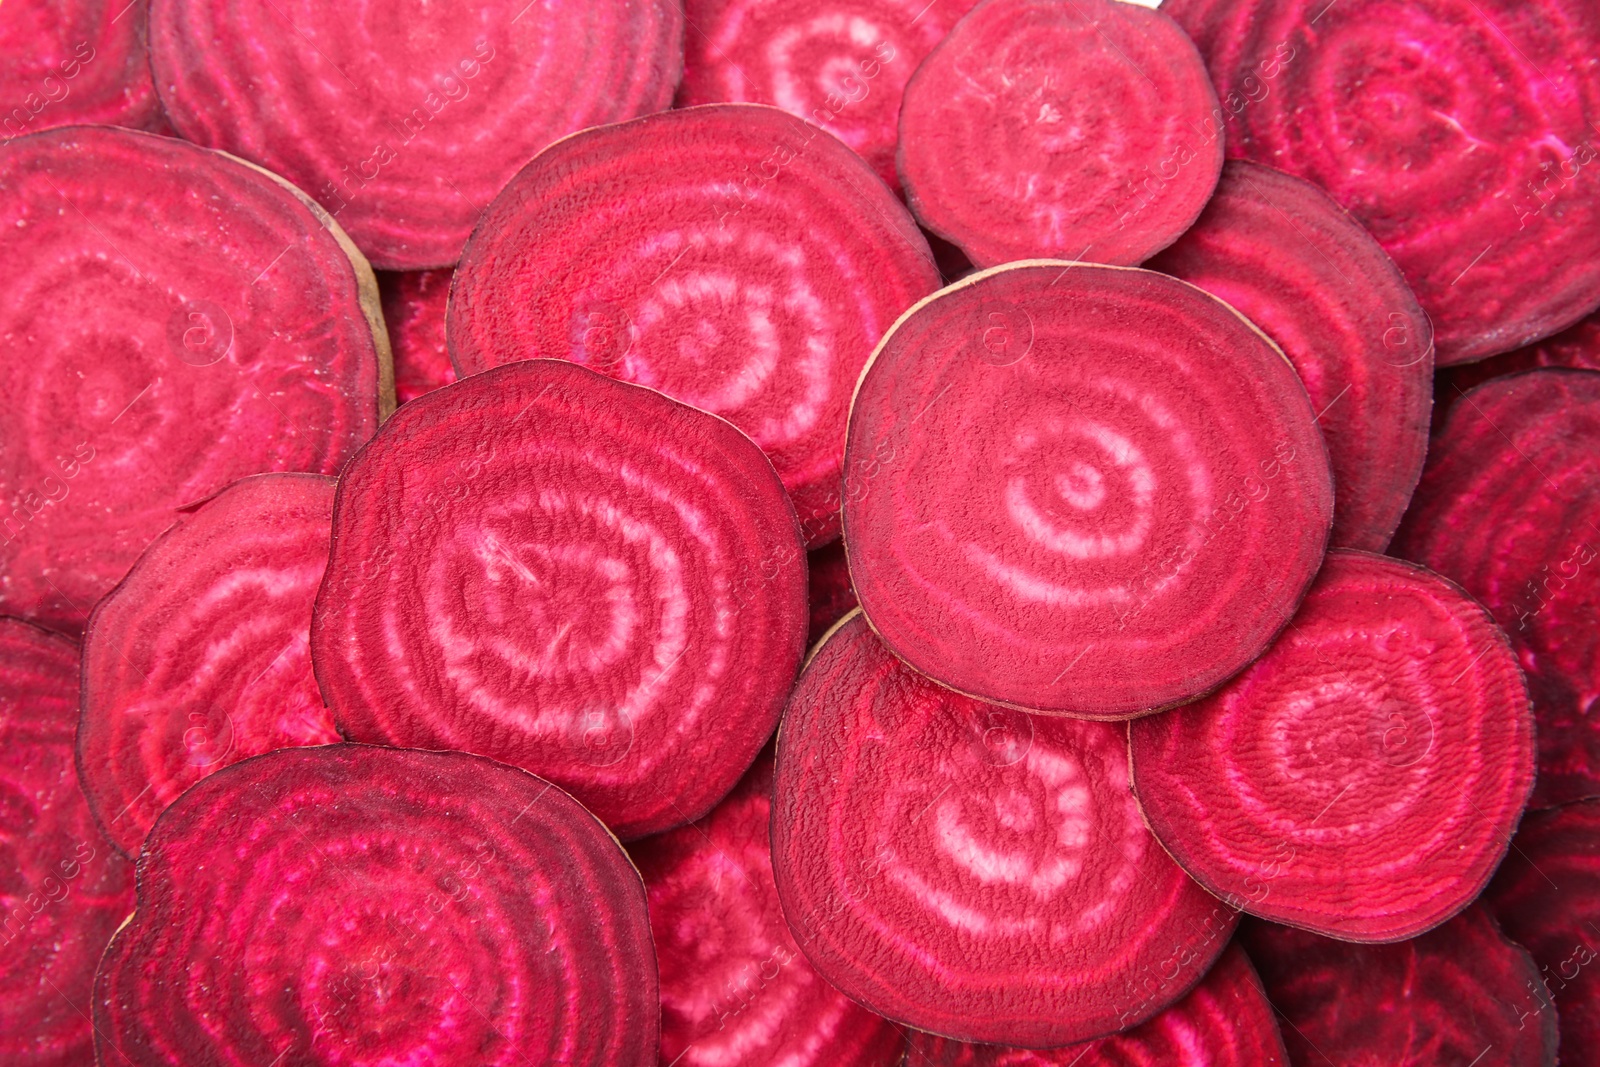 Photo of Sliced red beets as background, top view